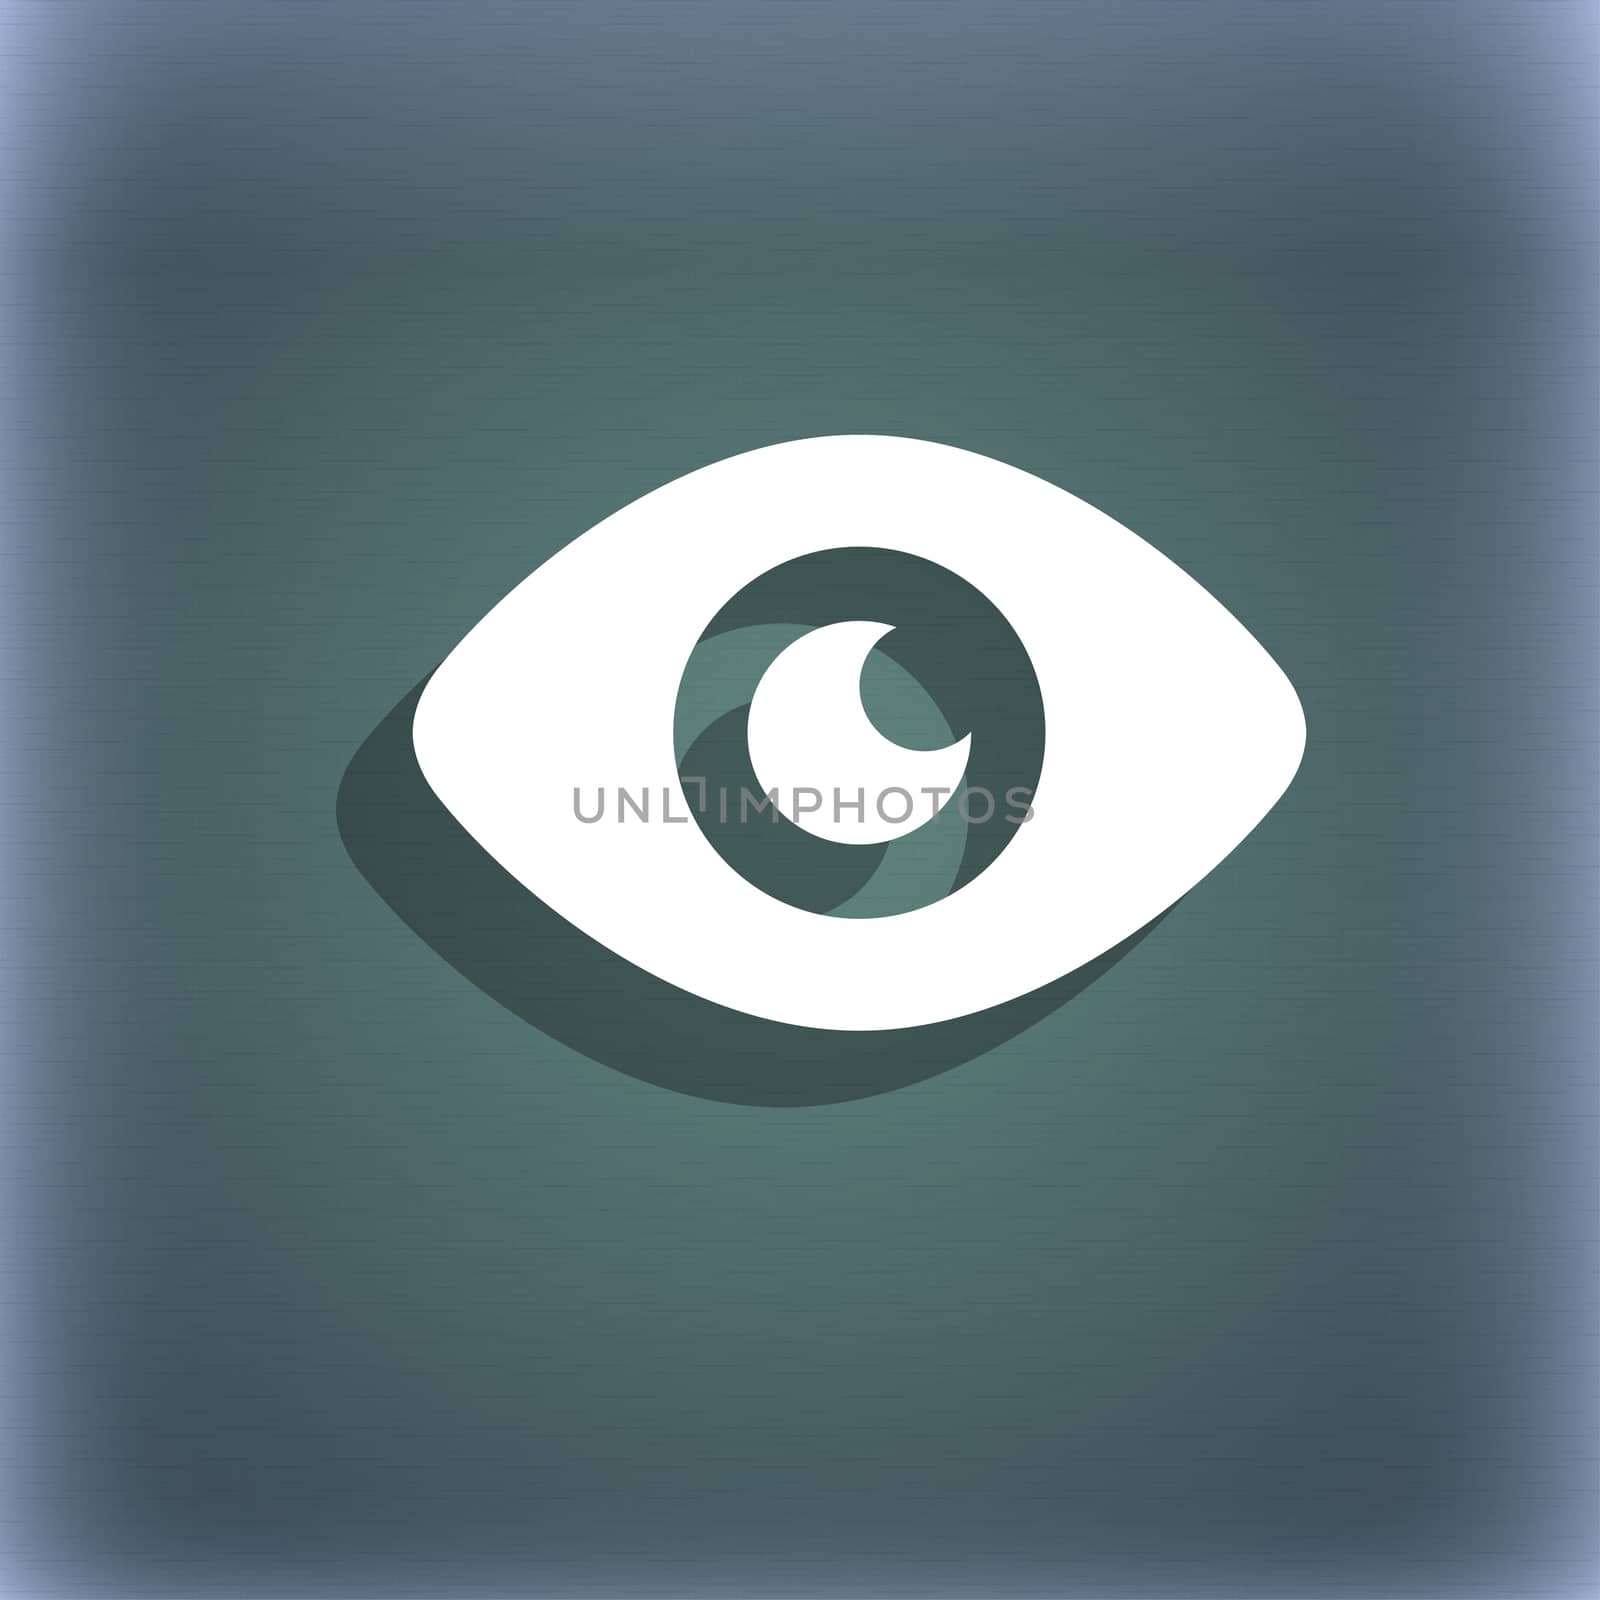 Eye, Publish content icon symbol on the blue-green abstract background with shadow and space for your text. illustration